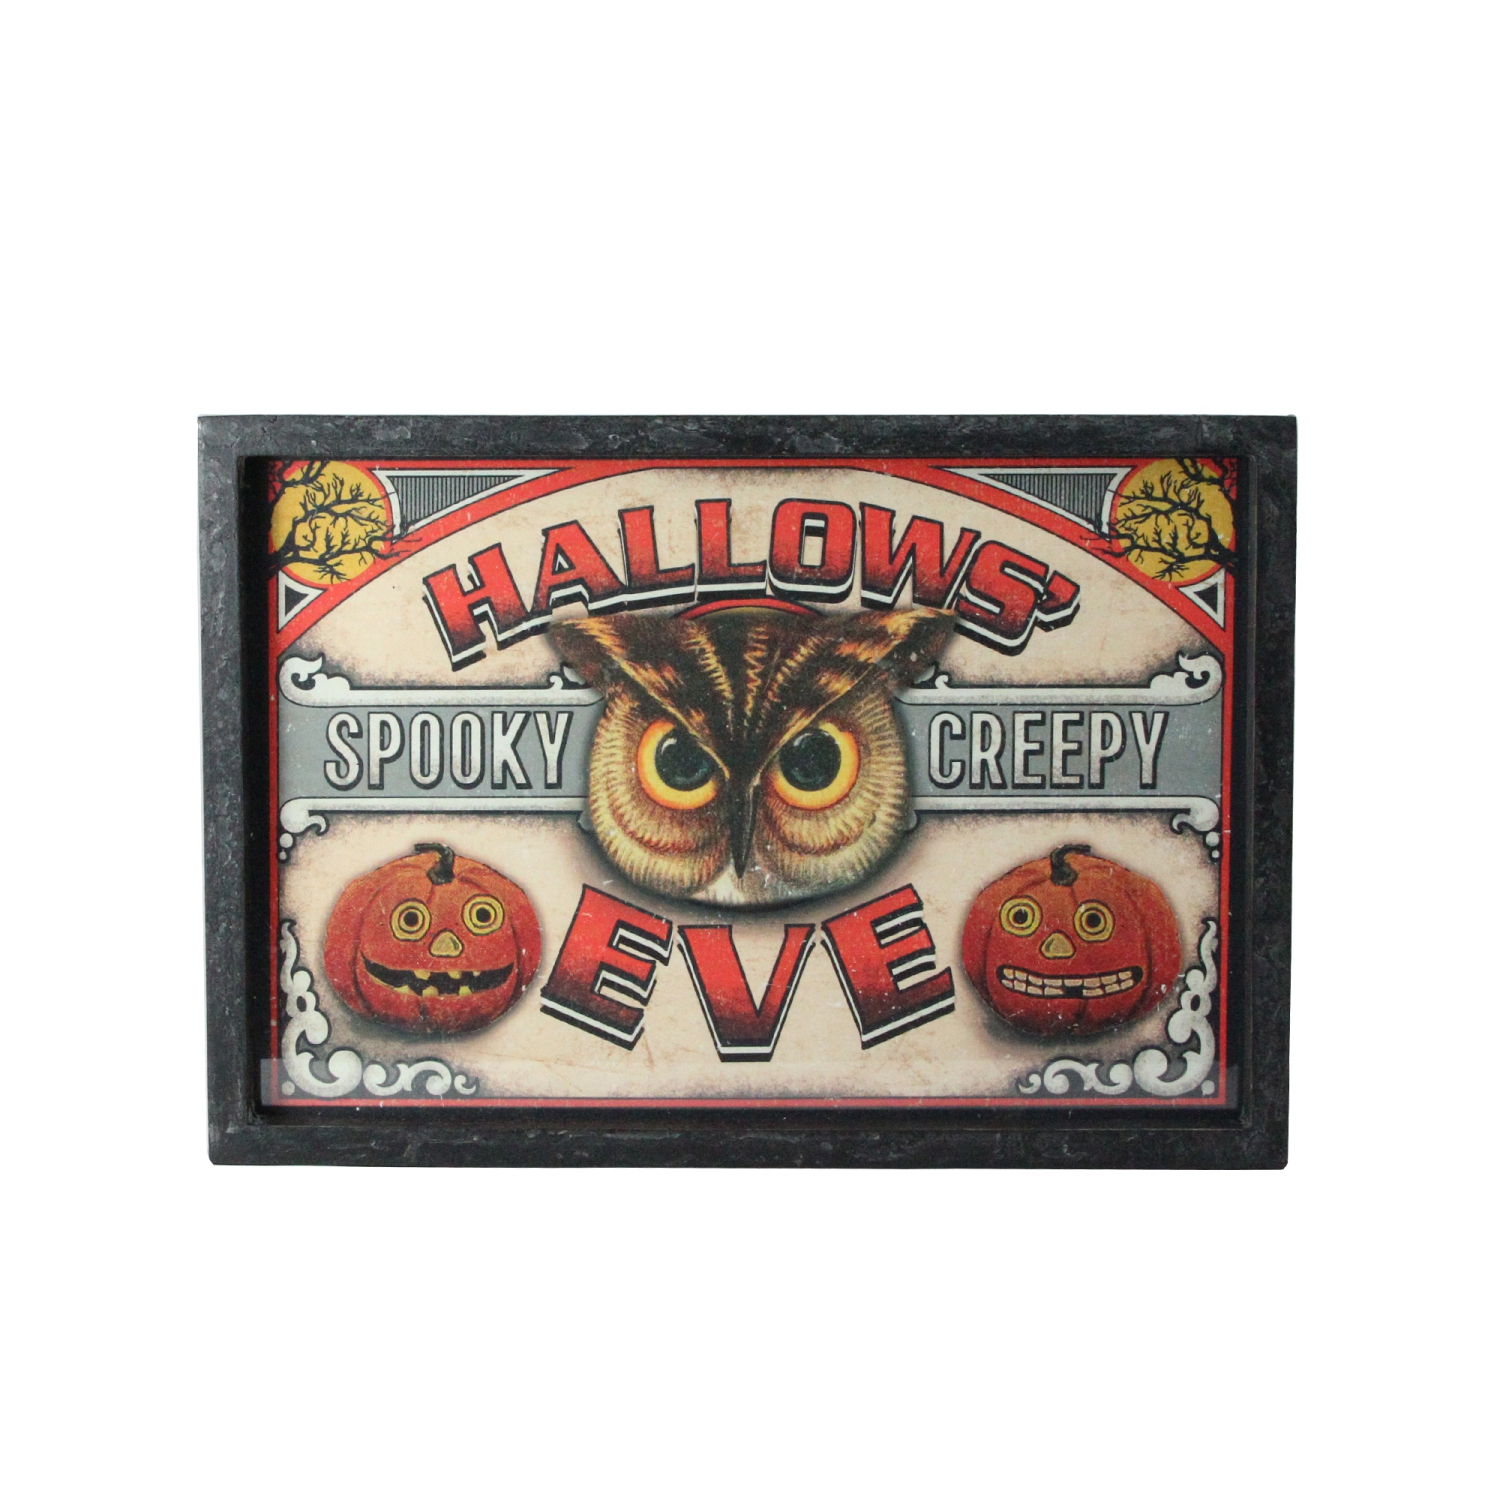 Black and Red "HALLOWS' EVE" Framed Rectangular Wall Art 11" x 16"